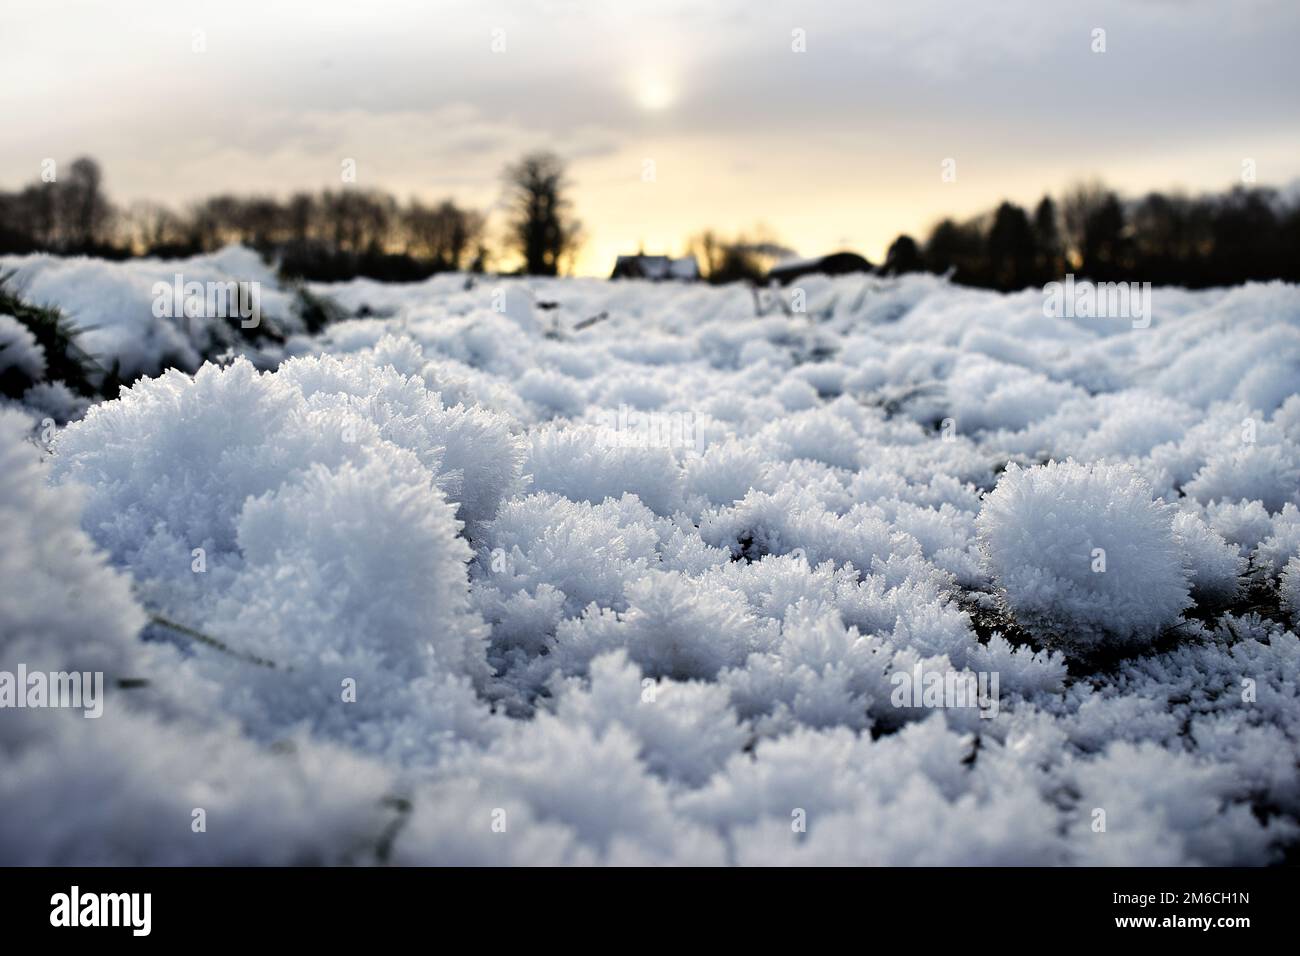 Snow crystals form into balls of protruding shards of ice in a field of grass. The sunrise view leads up to a farmhouse cottage and barn. Stock Photo